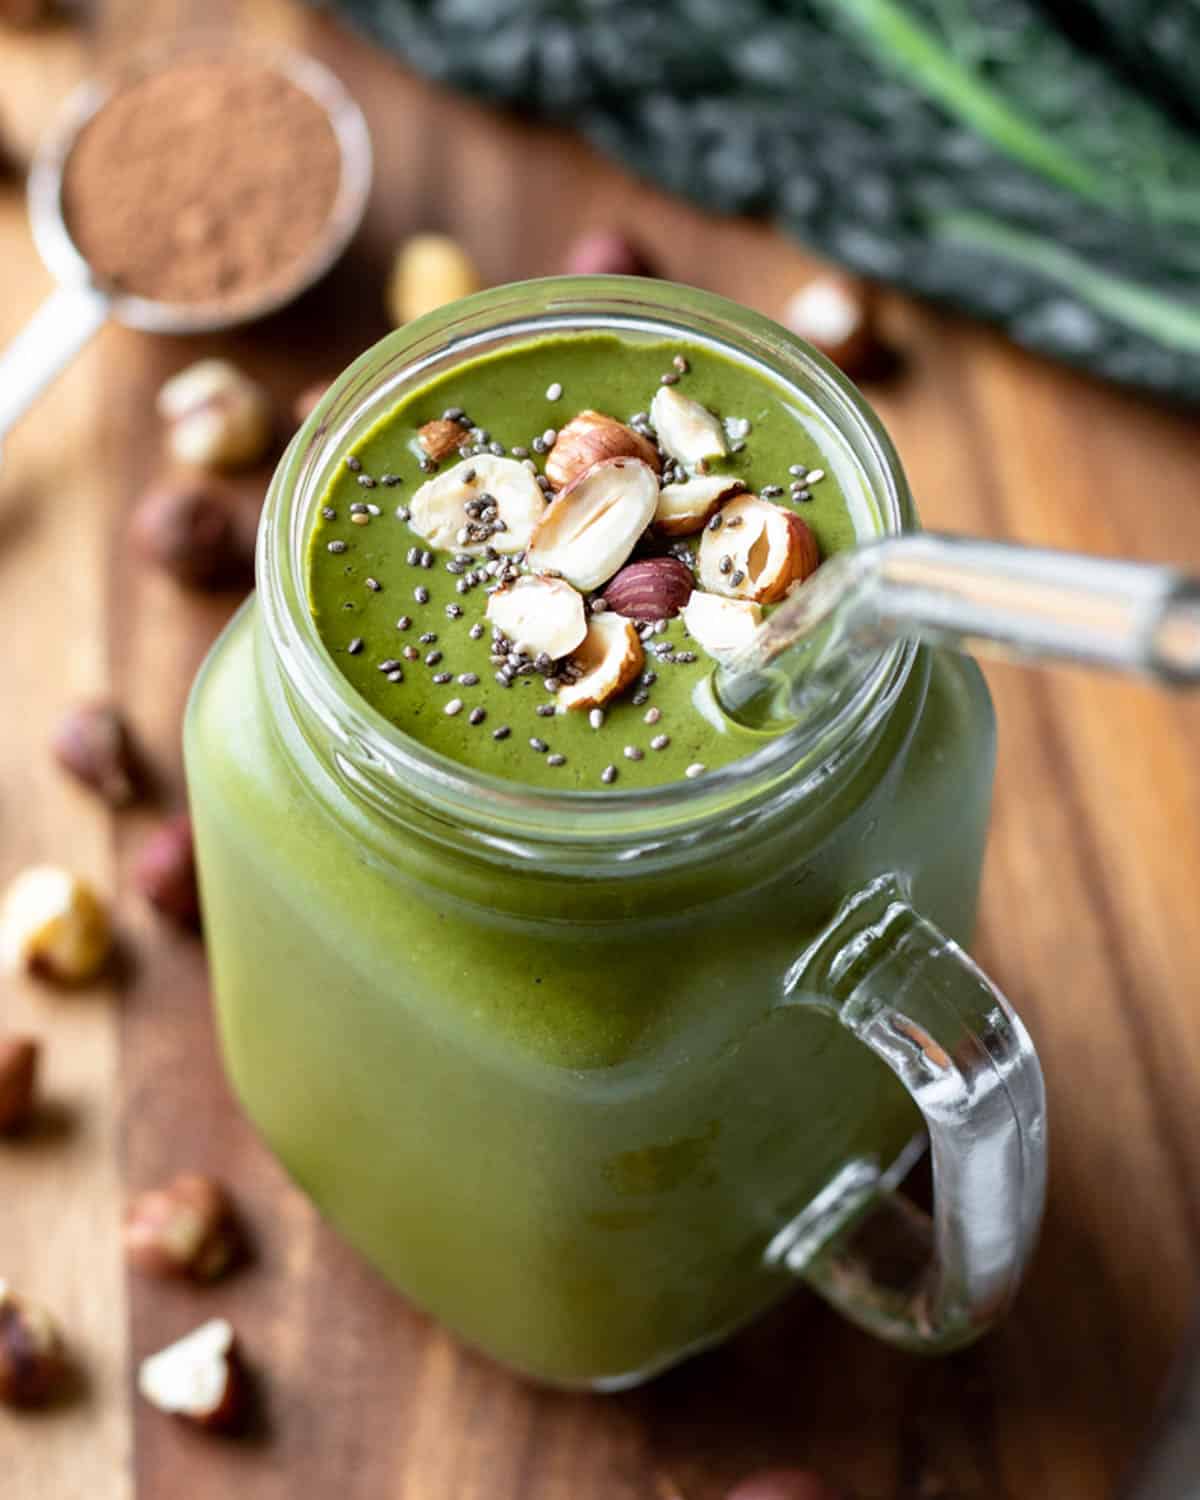 kale smoothie in a glass mug with hazelnuts and chia seeds sprinkled on top.